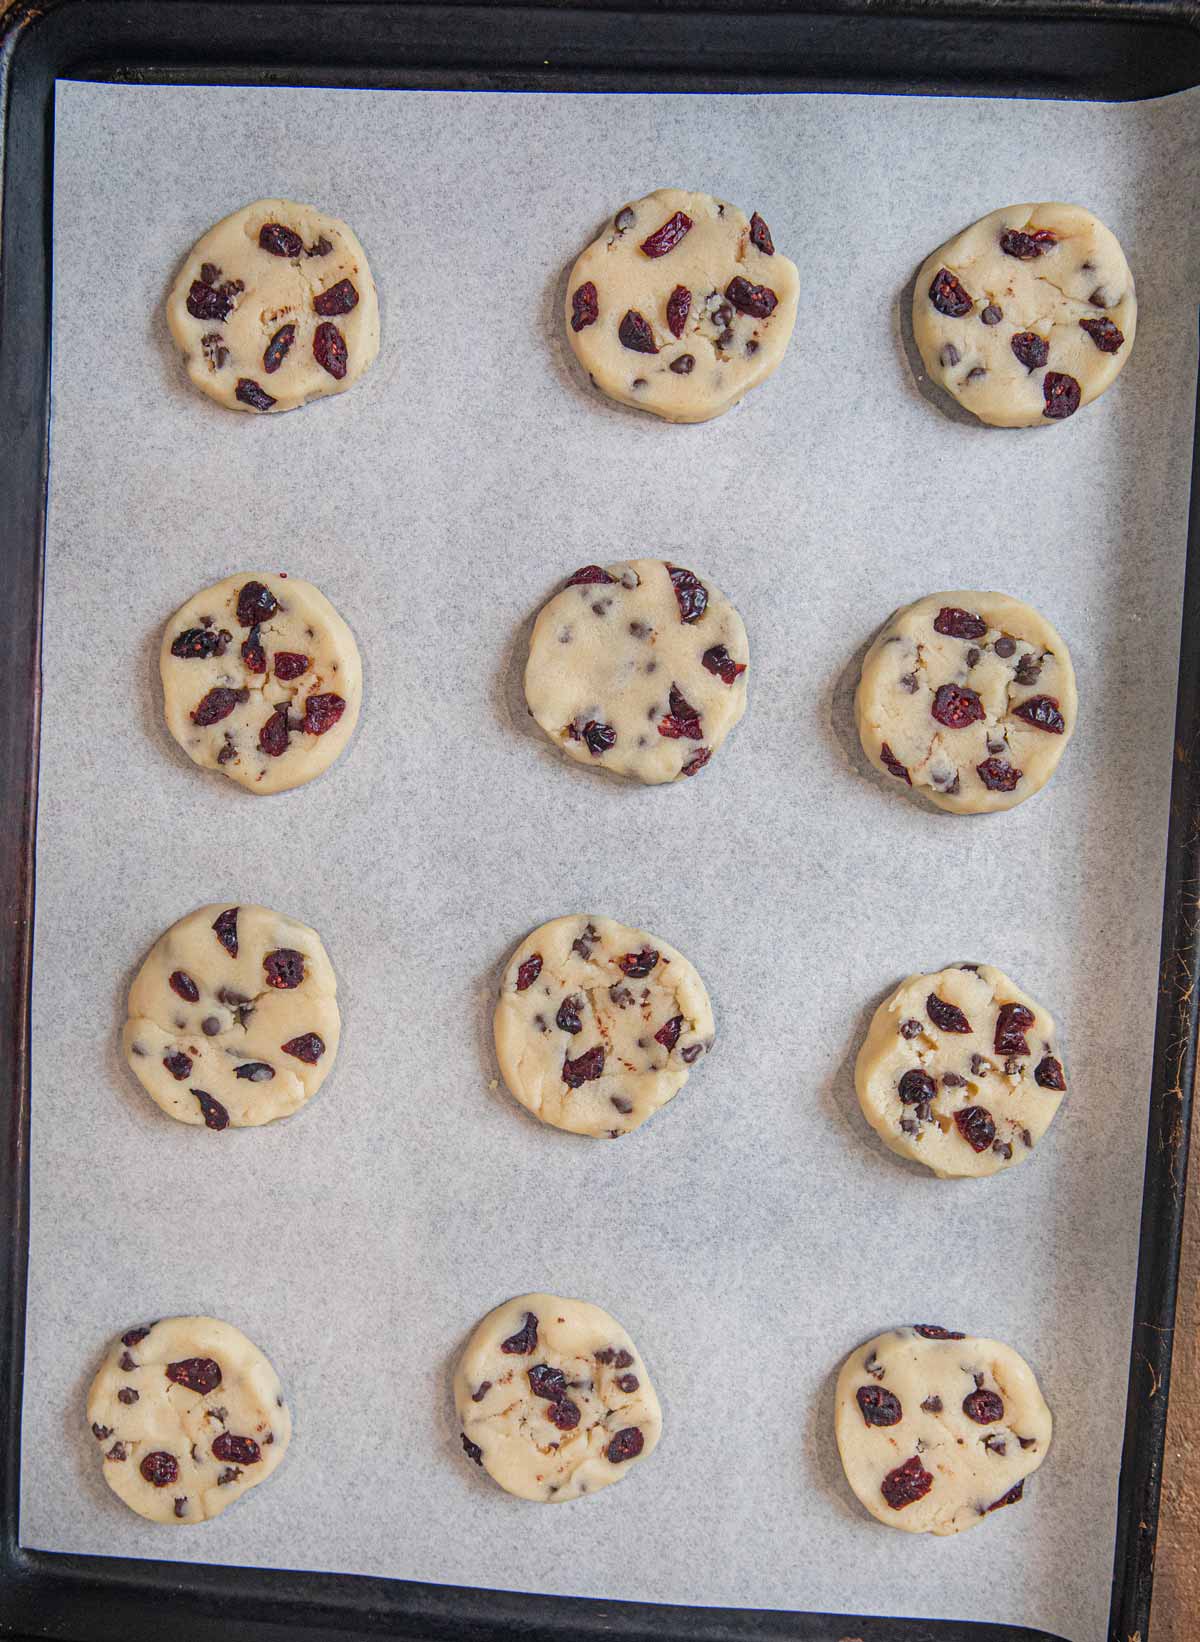 Cranberry Chip Shortbread Cookies on baking sheet before baking